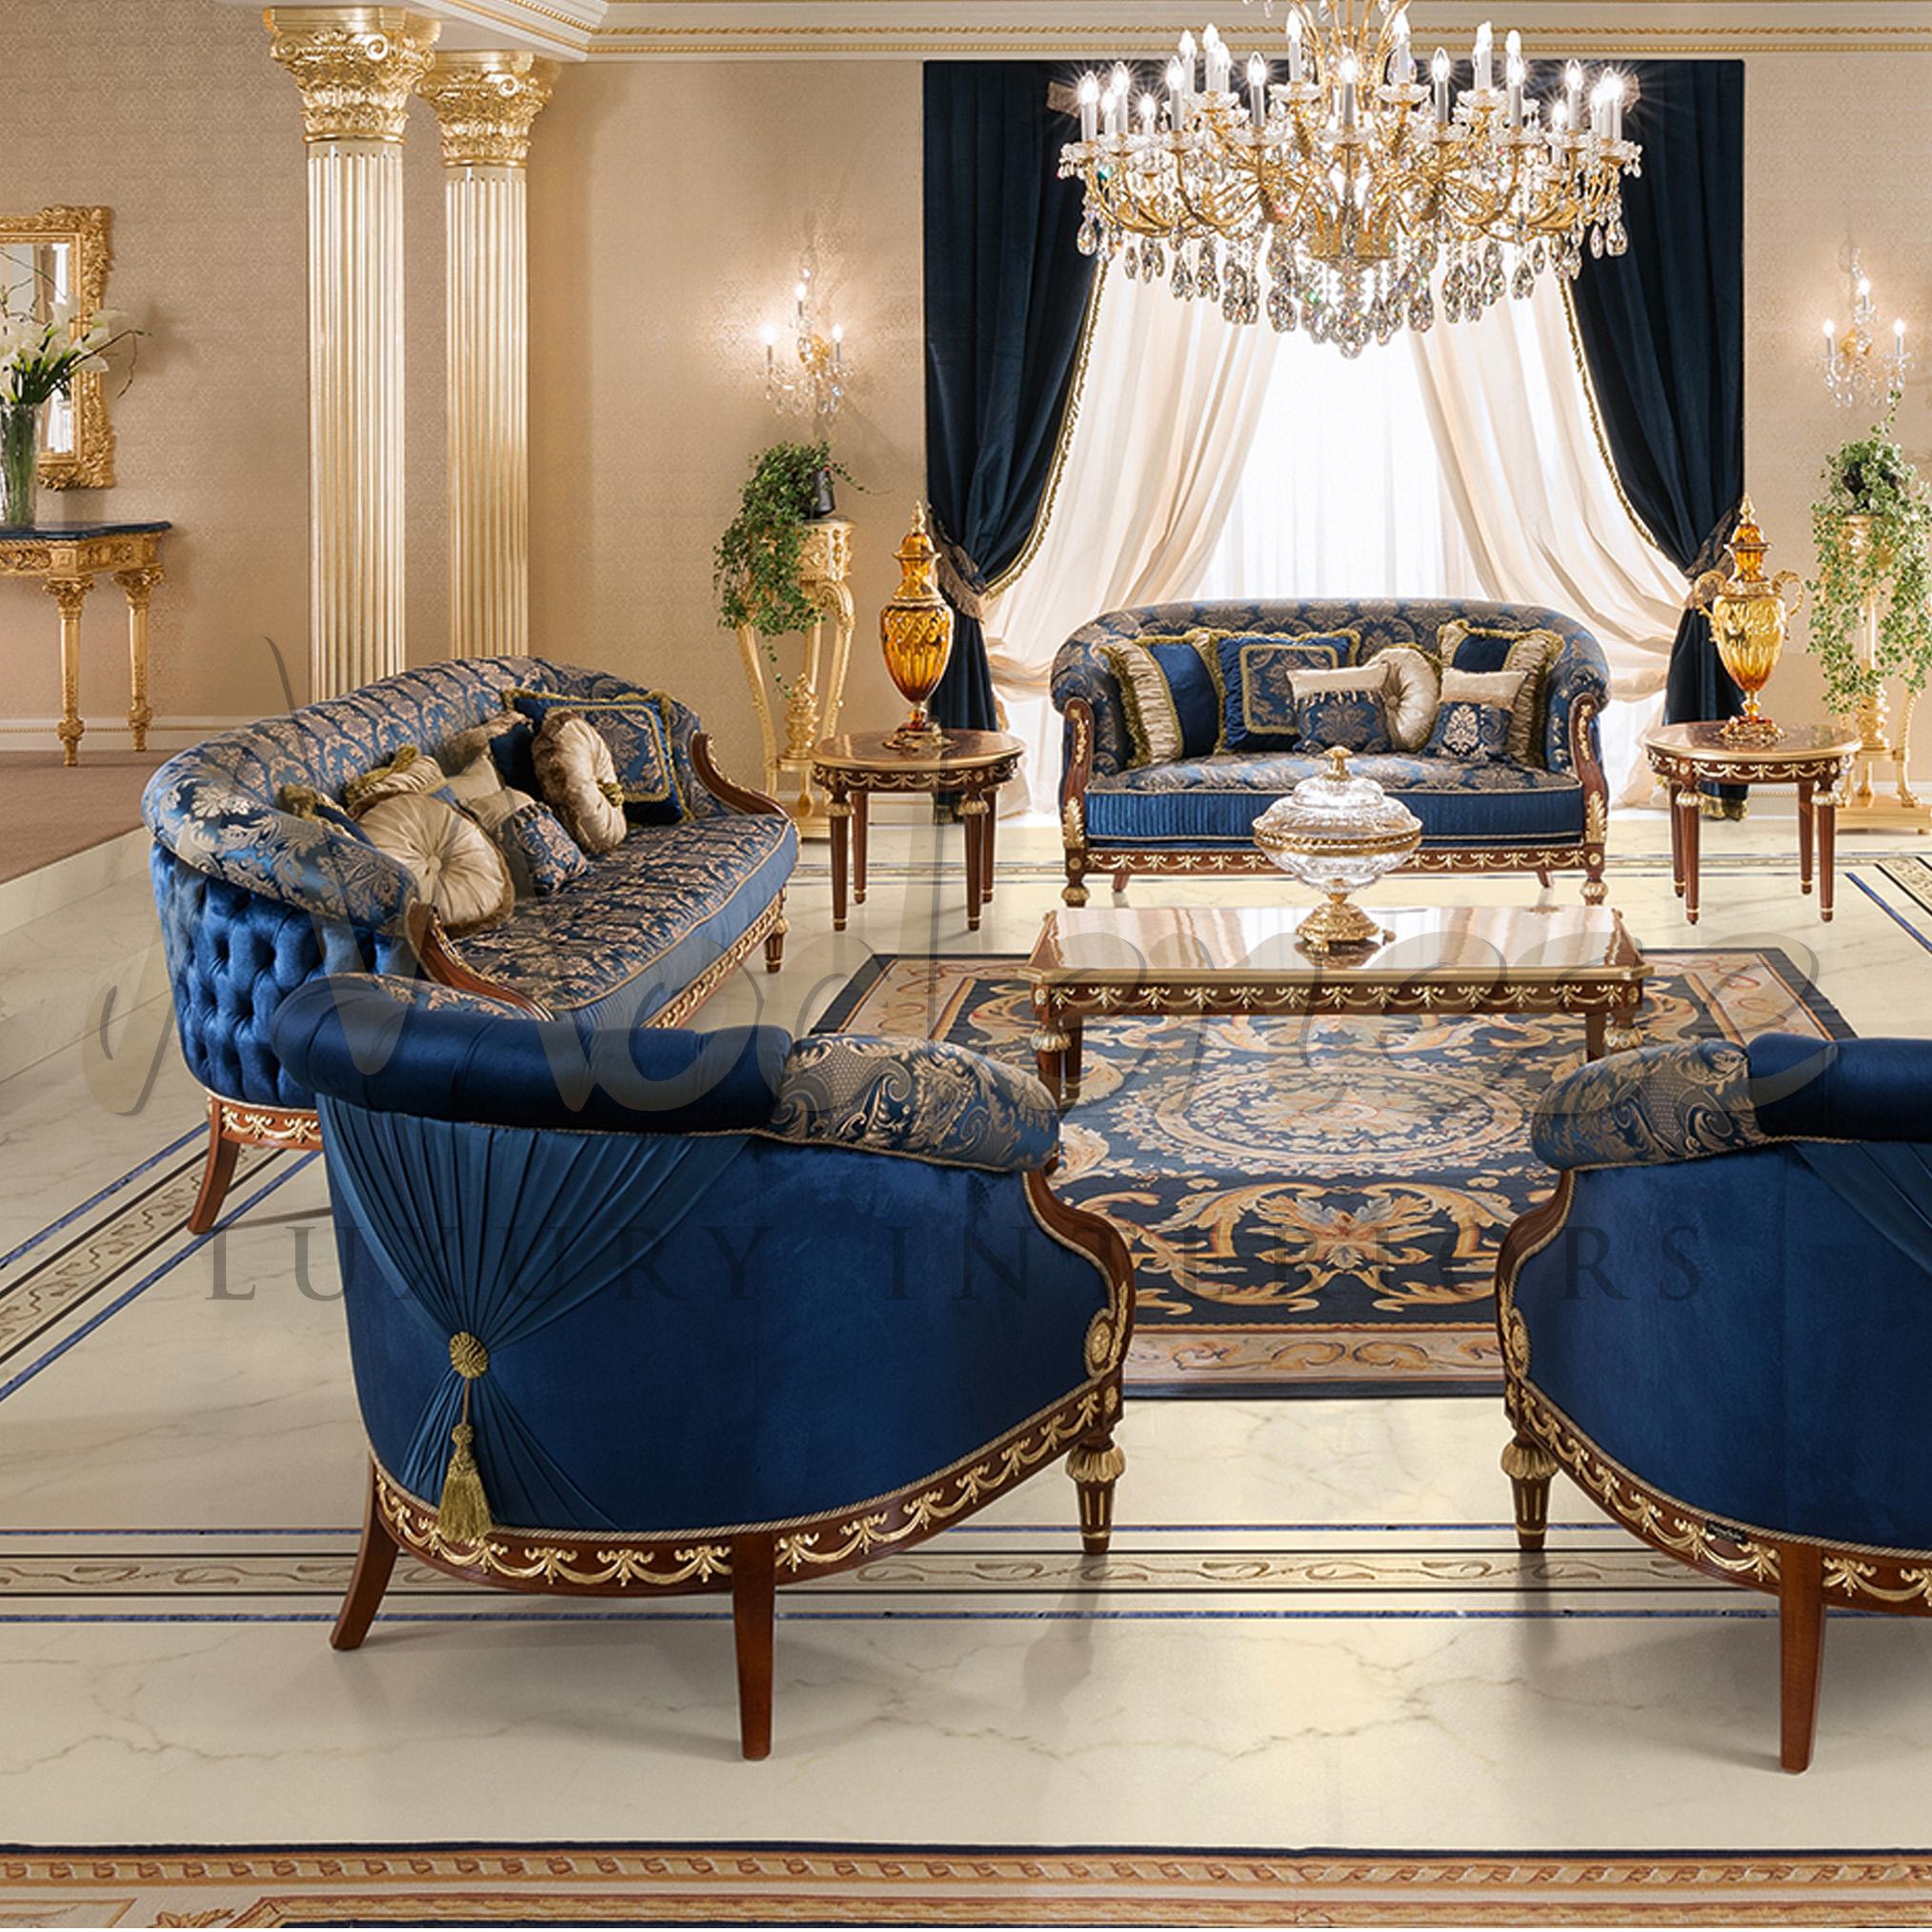 Appliqué  Royal Neoclassical Sofa in High Quality Cherry Wood and Shiny Gold Leaf Decor For Sale